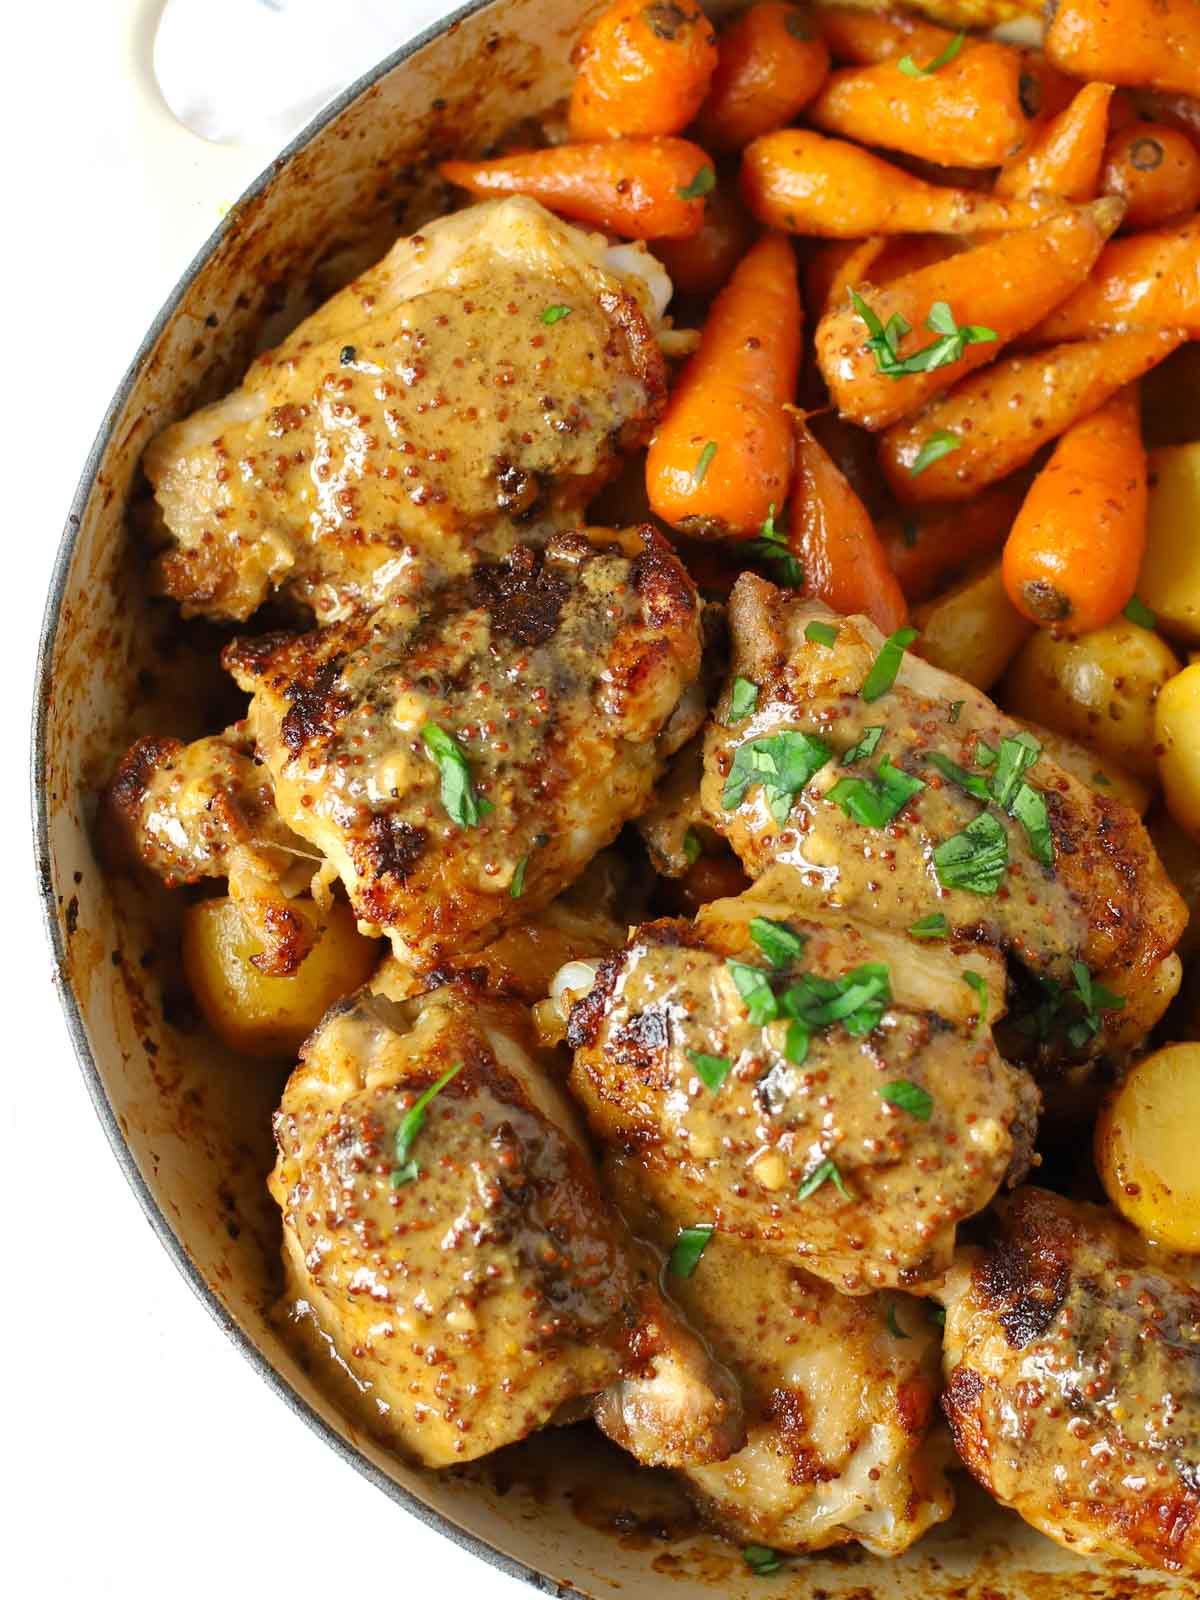 Crunchy roasted chicken thighs with roasted carrots and potatoes in honey mustard sauce.